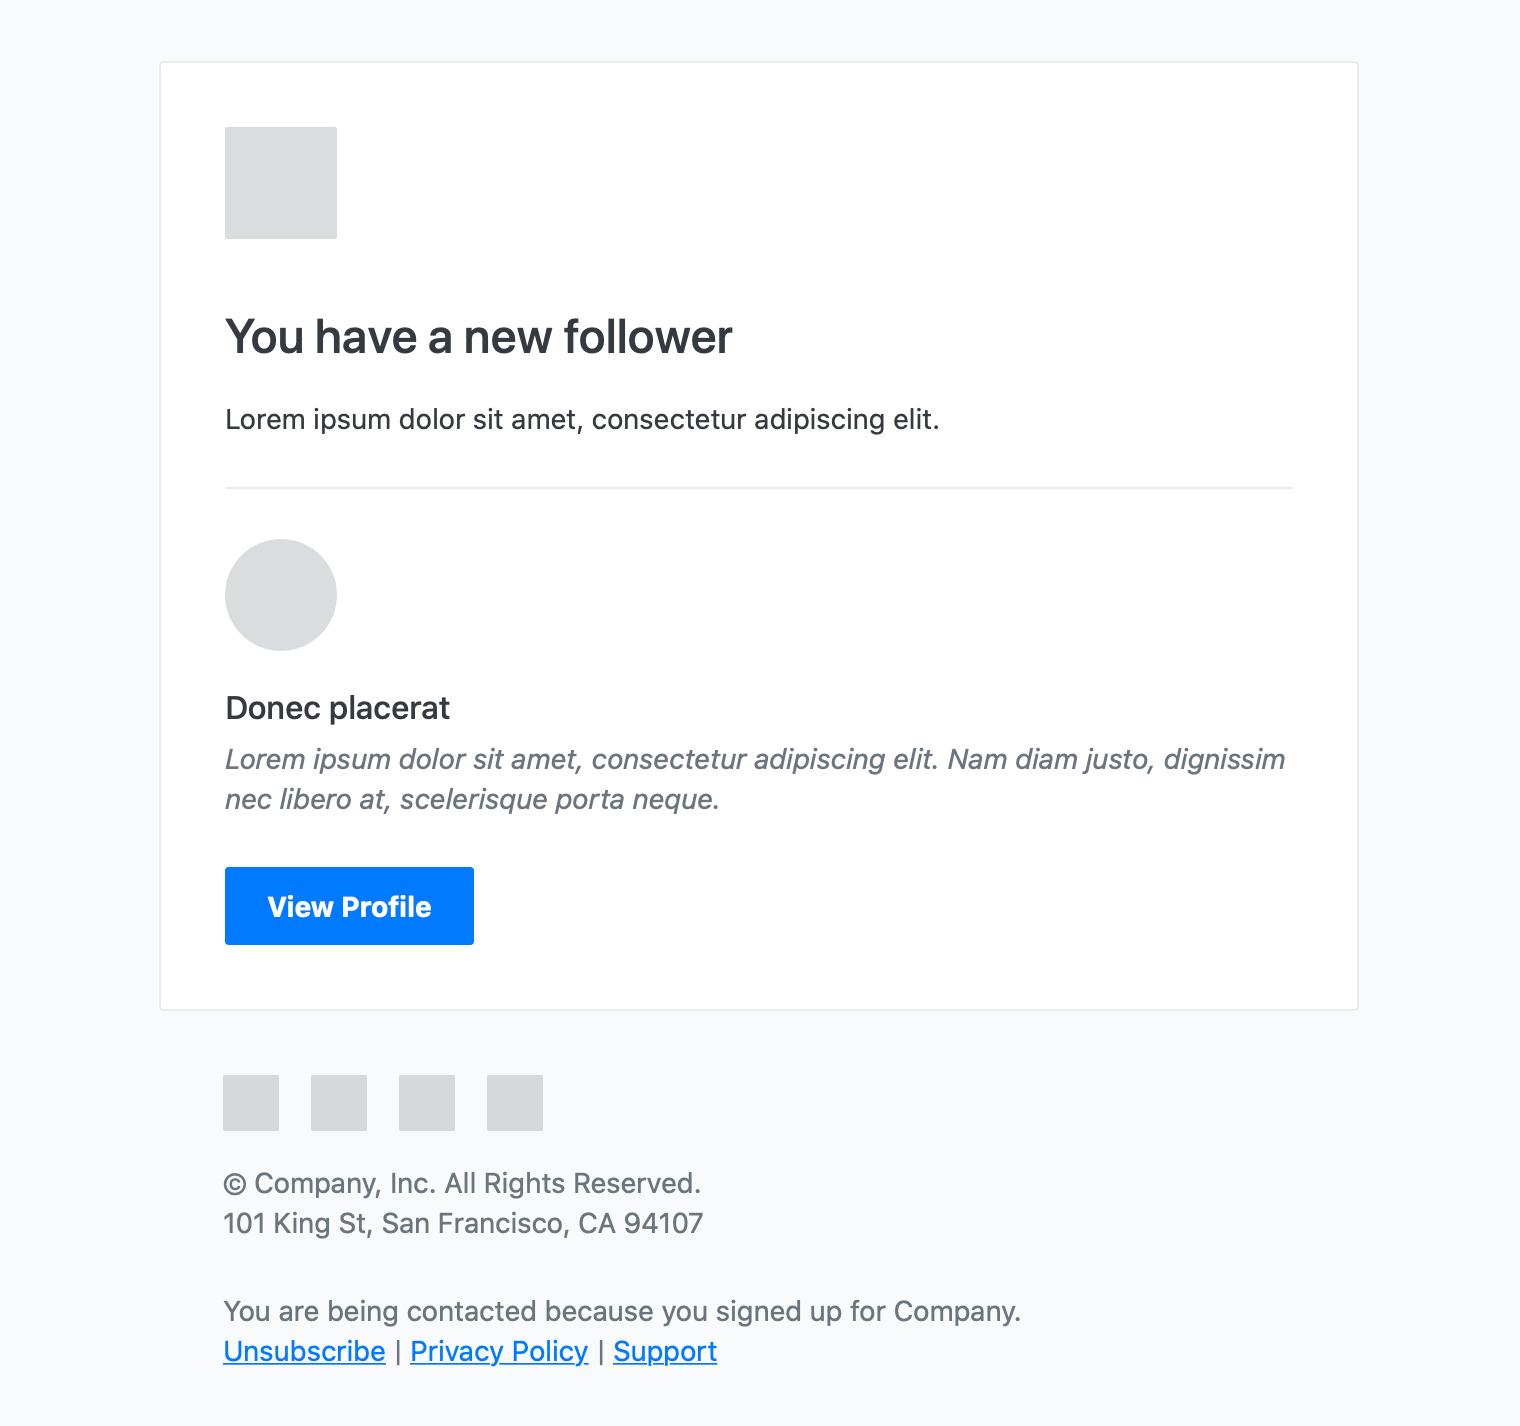 New Follower Email Template